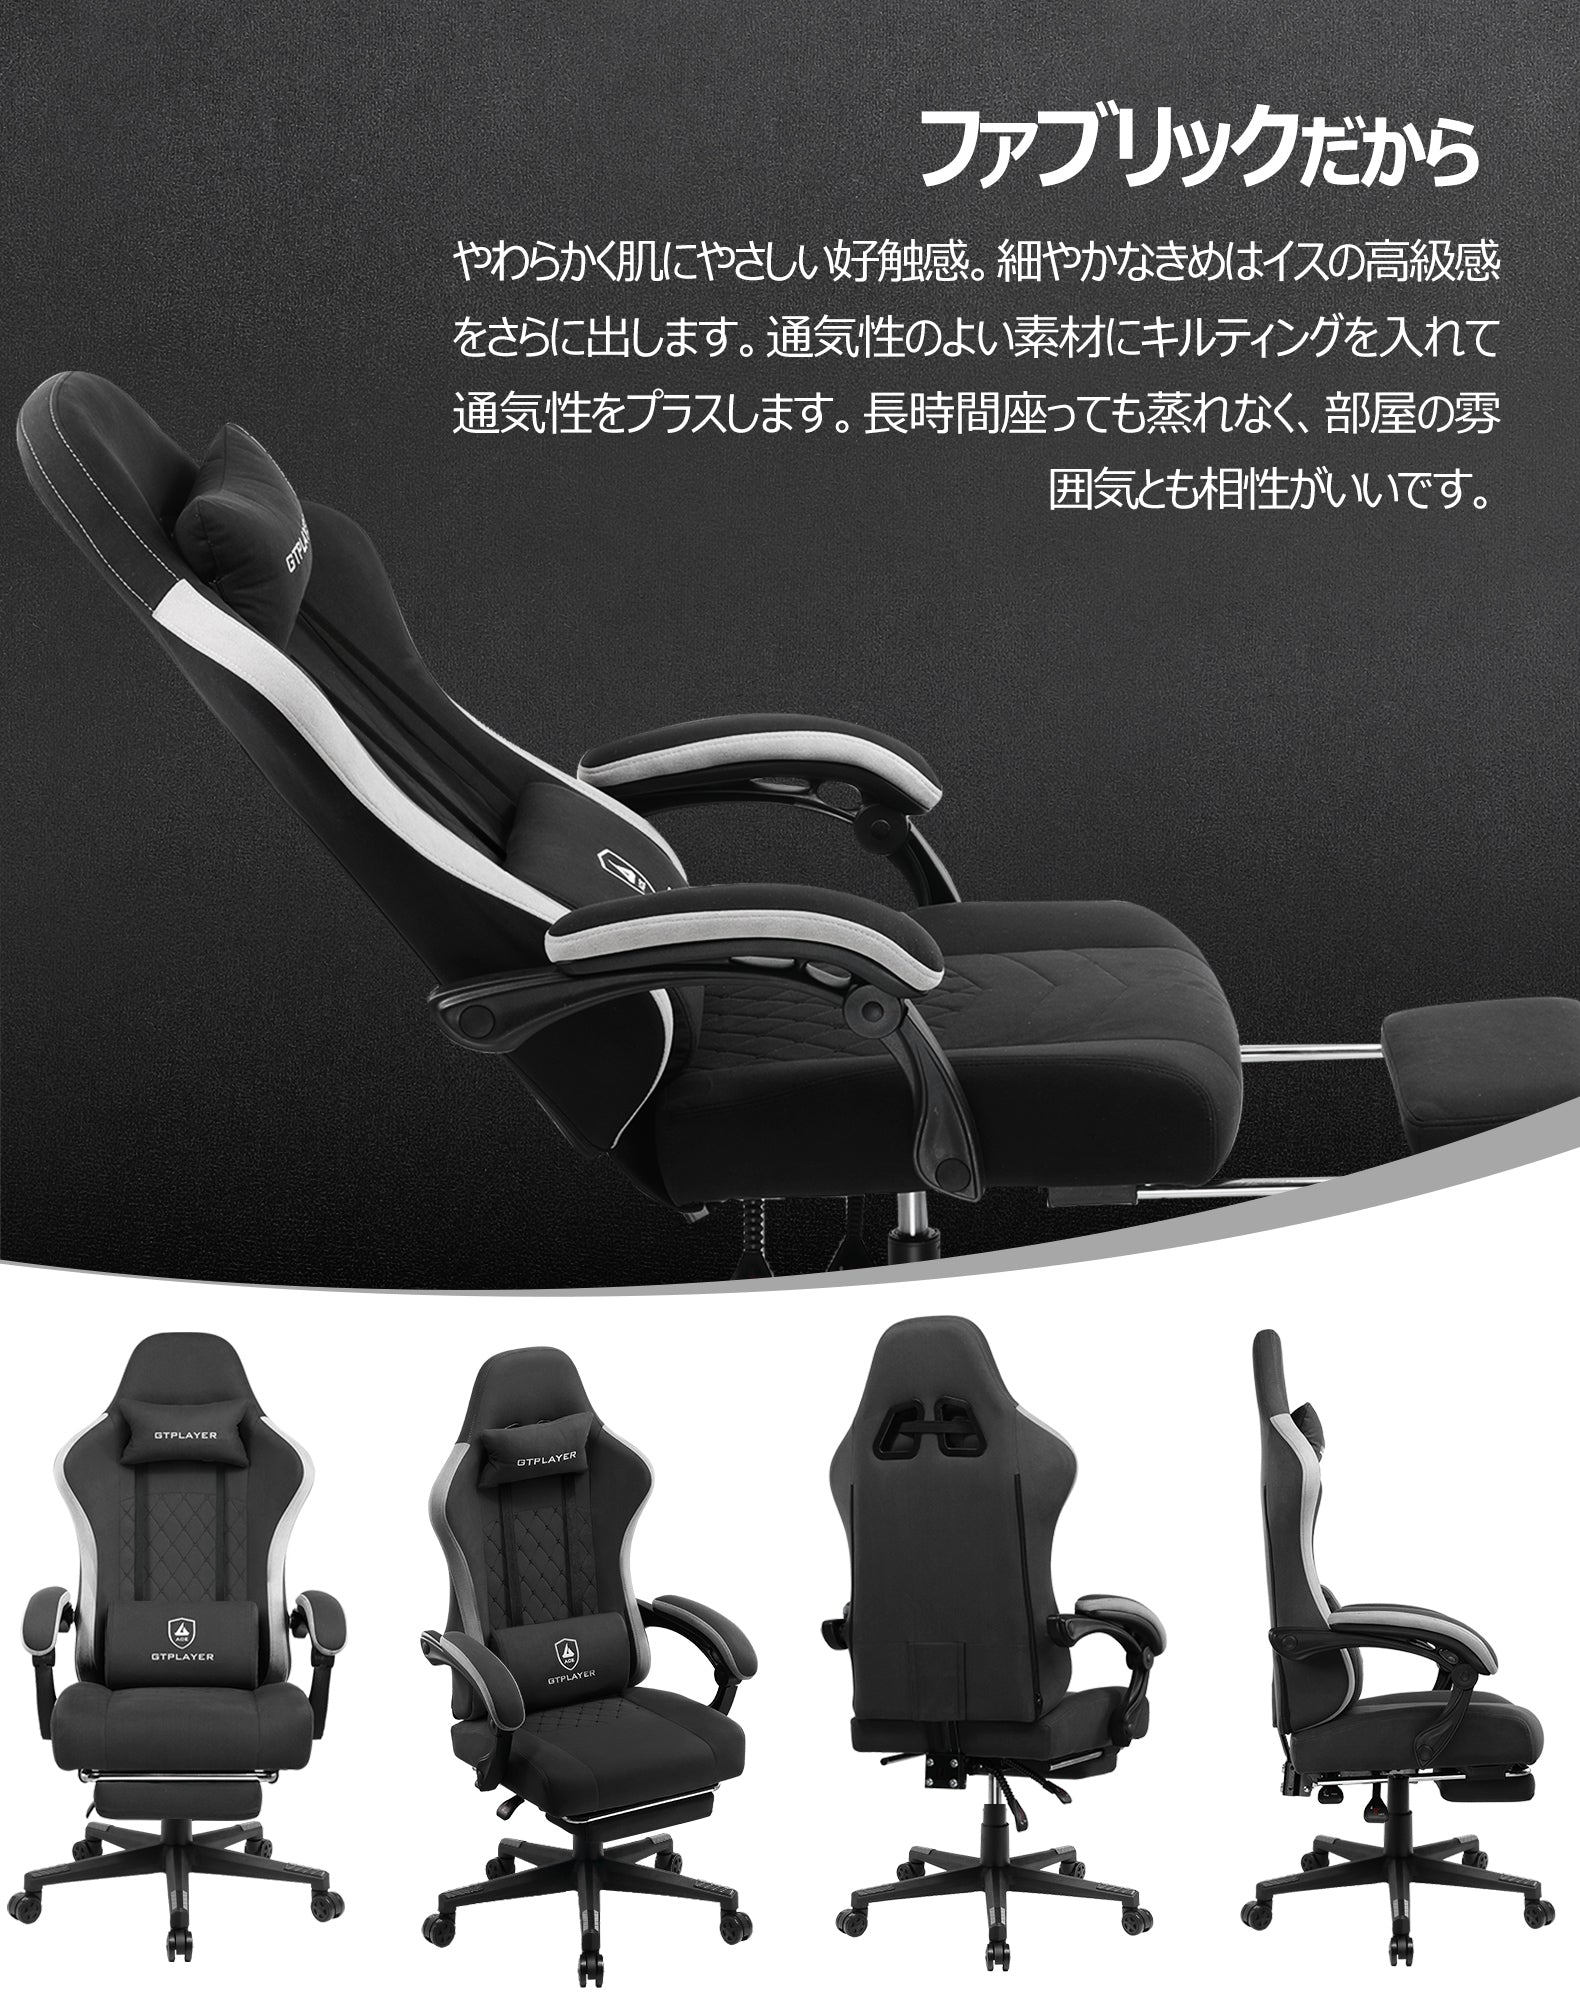 LR002 Gaming Chair with Footrest | GTRACING